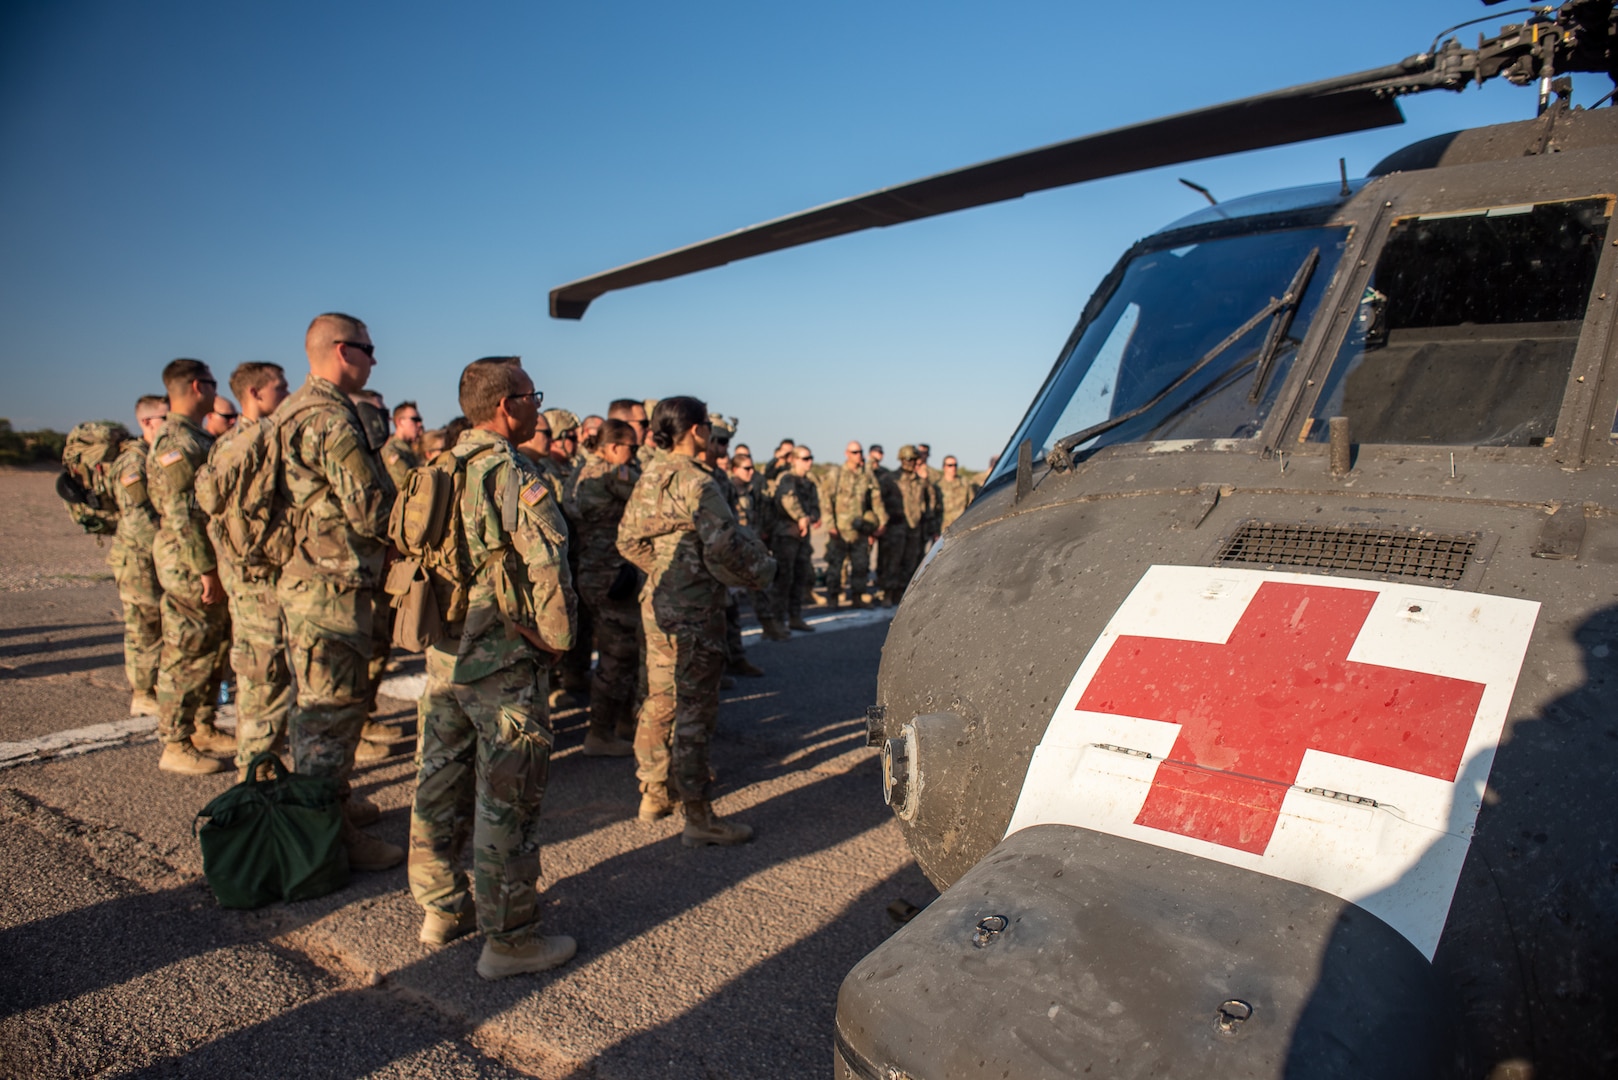 U.S. Army Combat Medic Soldiers in the 30th Armored Brigade Combat Team (ABCT),  conduct cold and hot load training on a MEDEVAC UH-60 Black Hawk helicopter from 5th Armored Brigade, First Army Division West, near Fort Bliss, Texas, September 3, 2019.